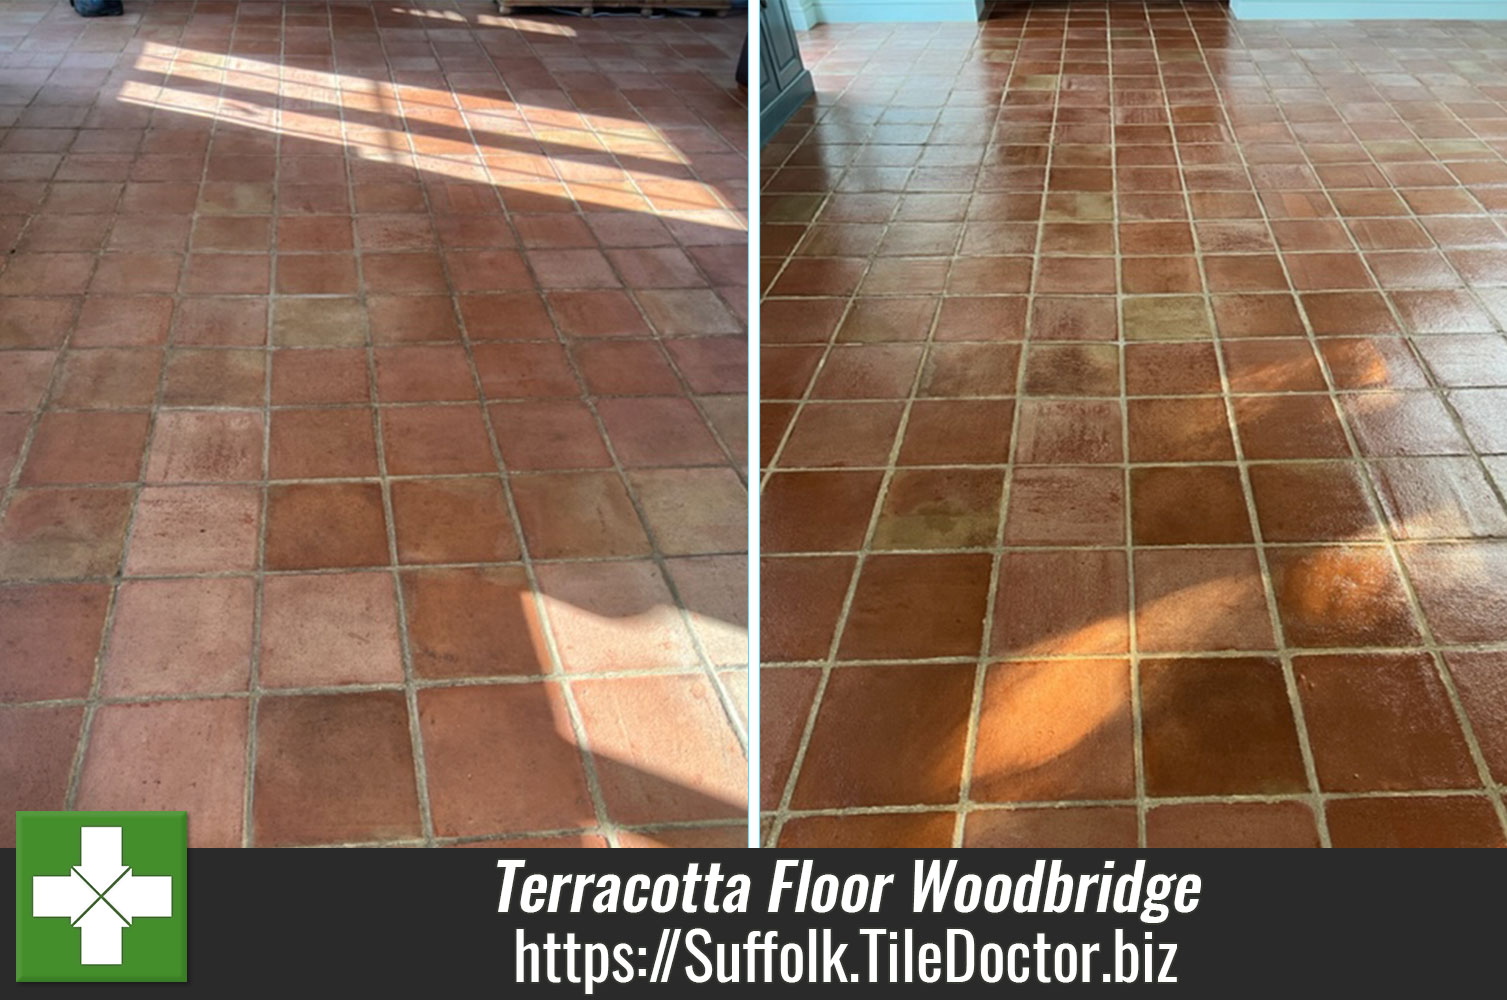 Deep Cleaning Terracotta Tile and Grout in a Woodbridge Kitchen